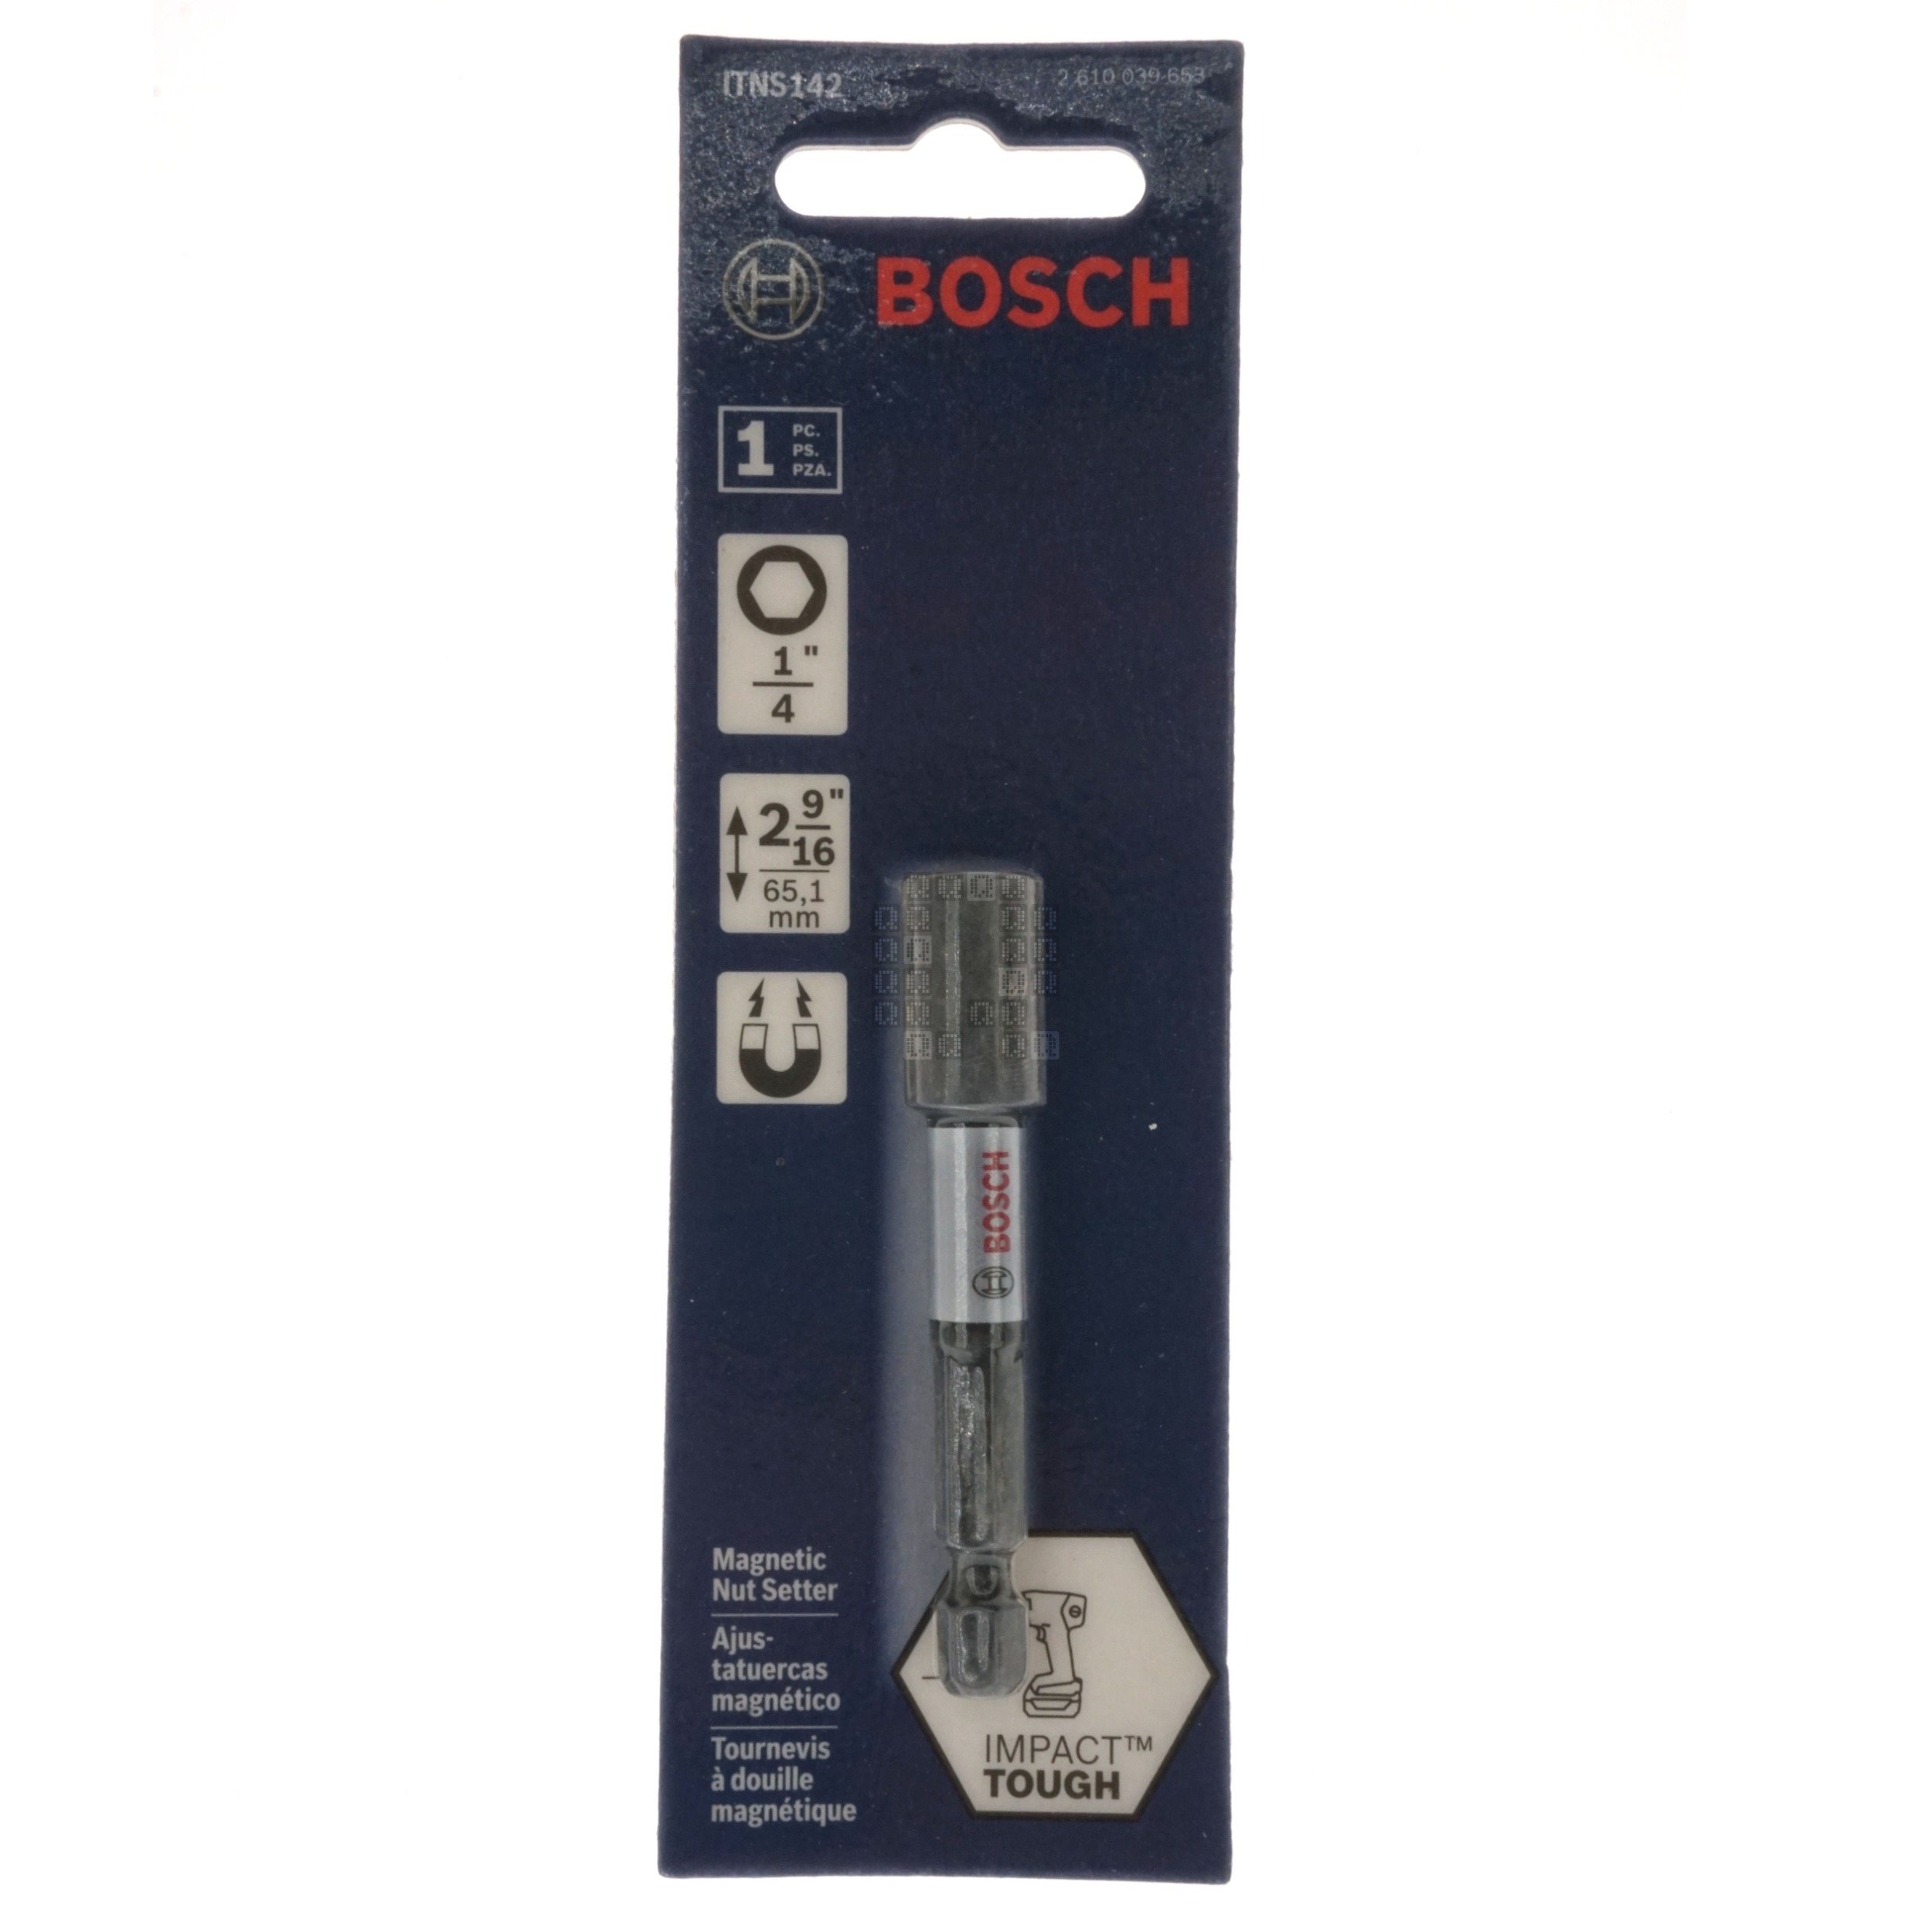 Bosch ITNS142 2610039653 Impact Tough 1/4" Magnetic Nut Setter, 2-9/16" Length